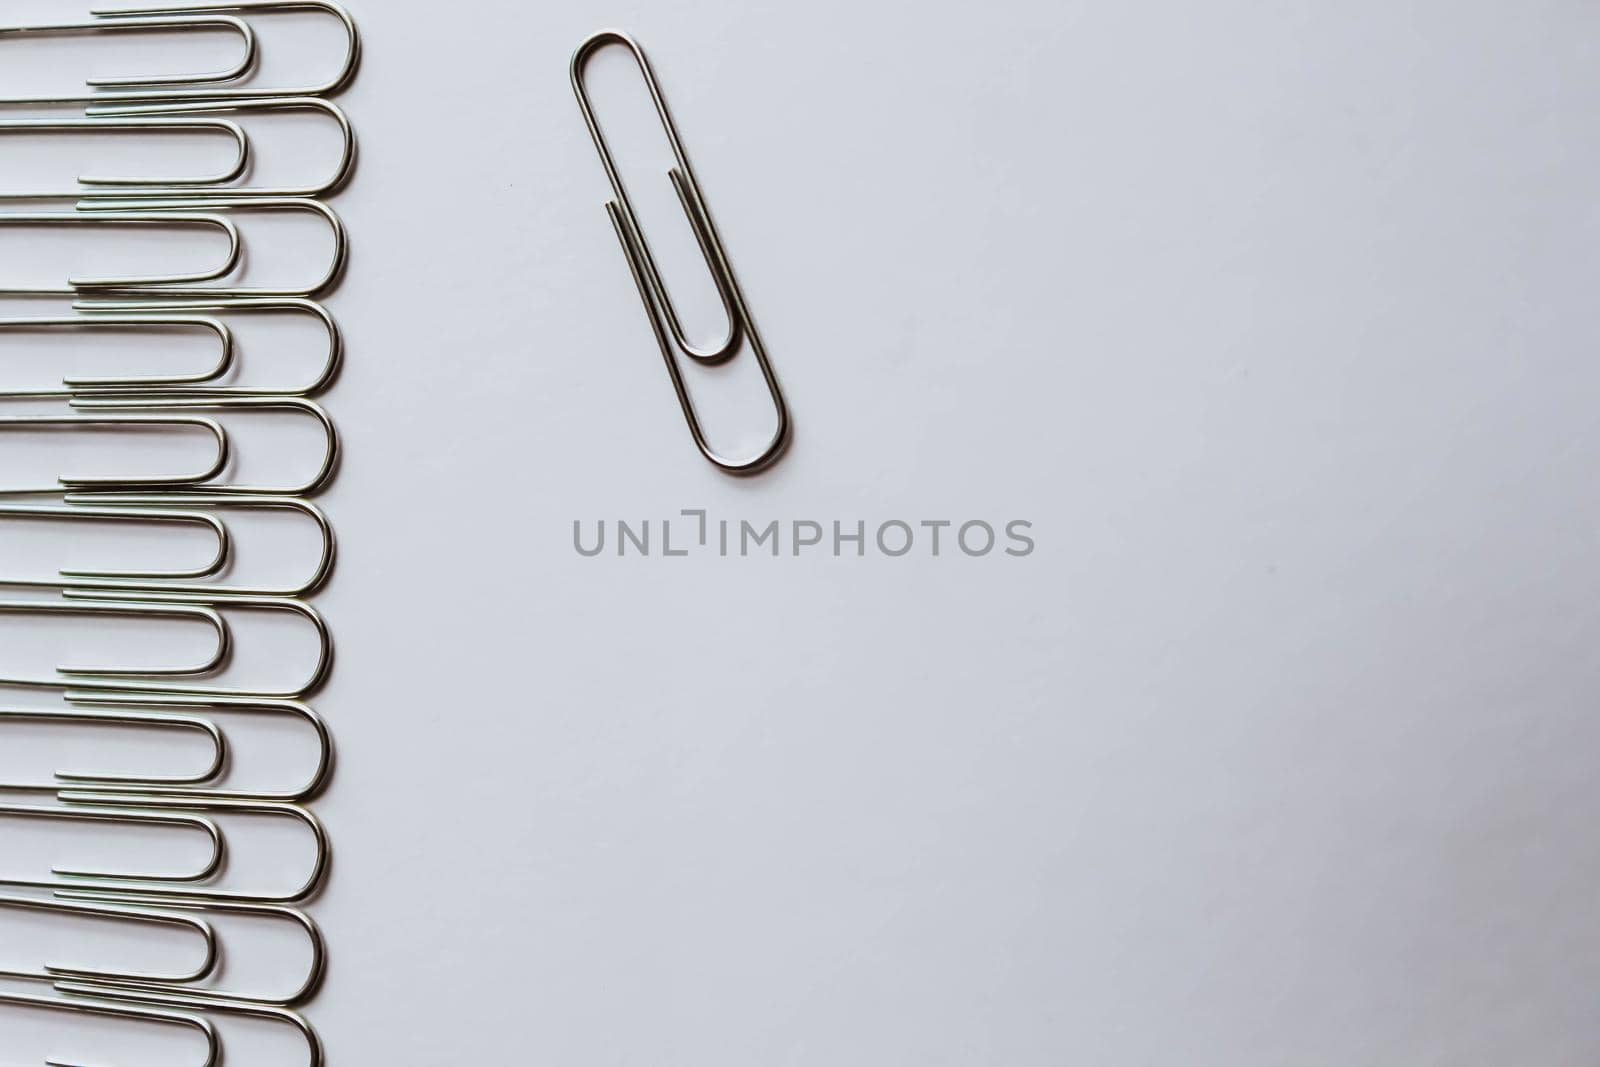 Metal paper clips on white background. Business concept by JuliaDorian